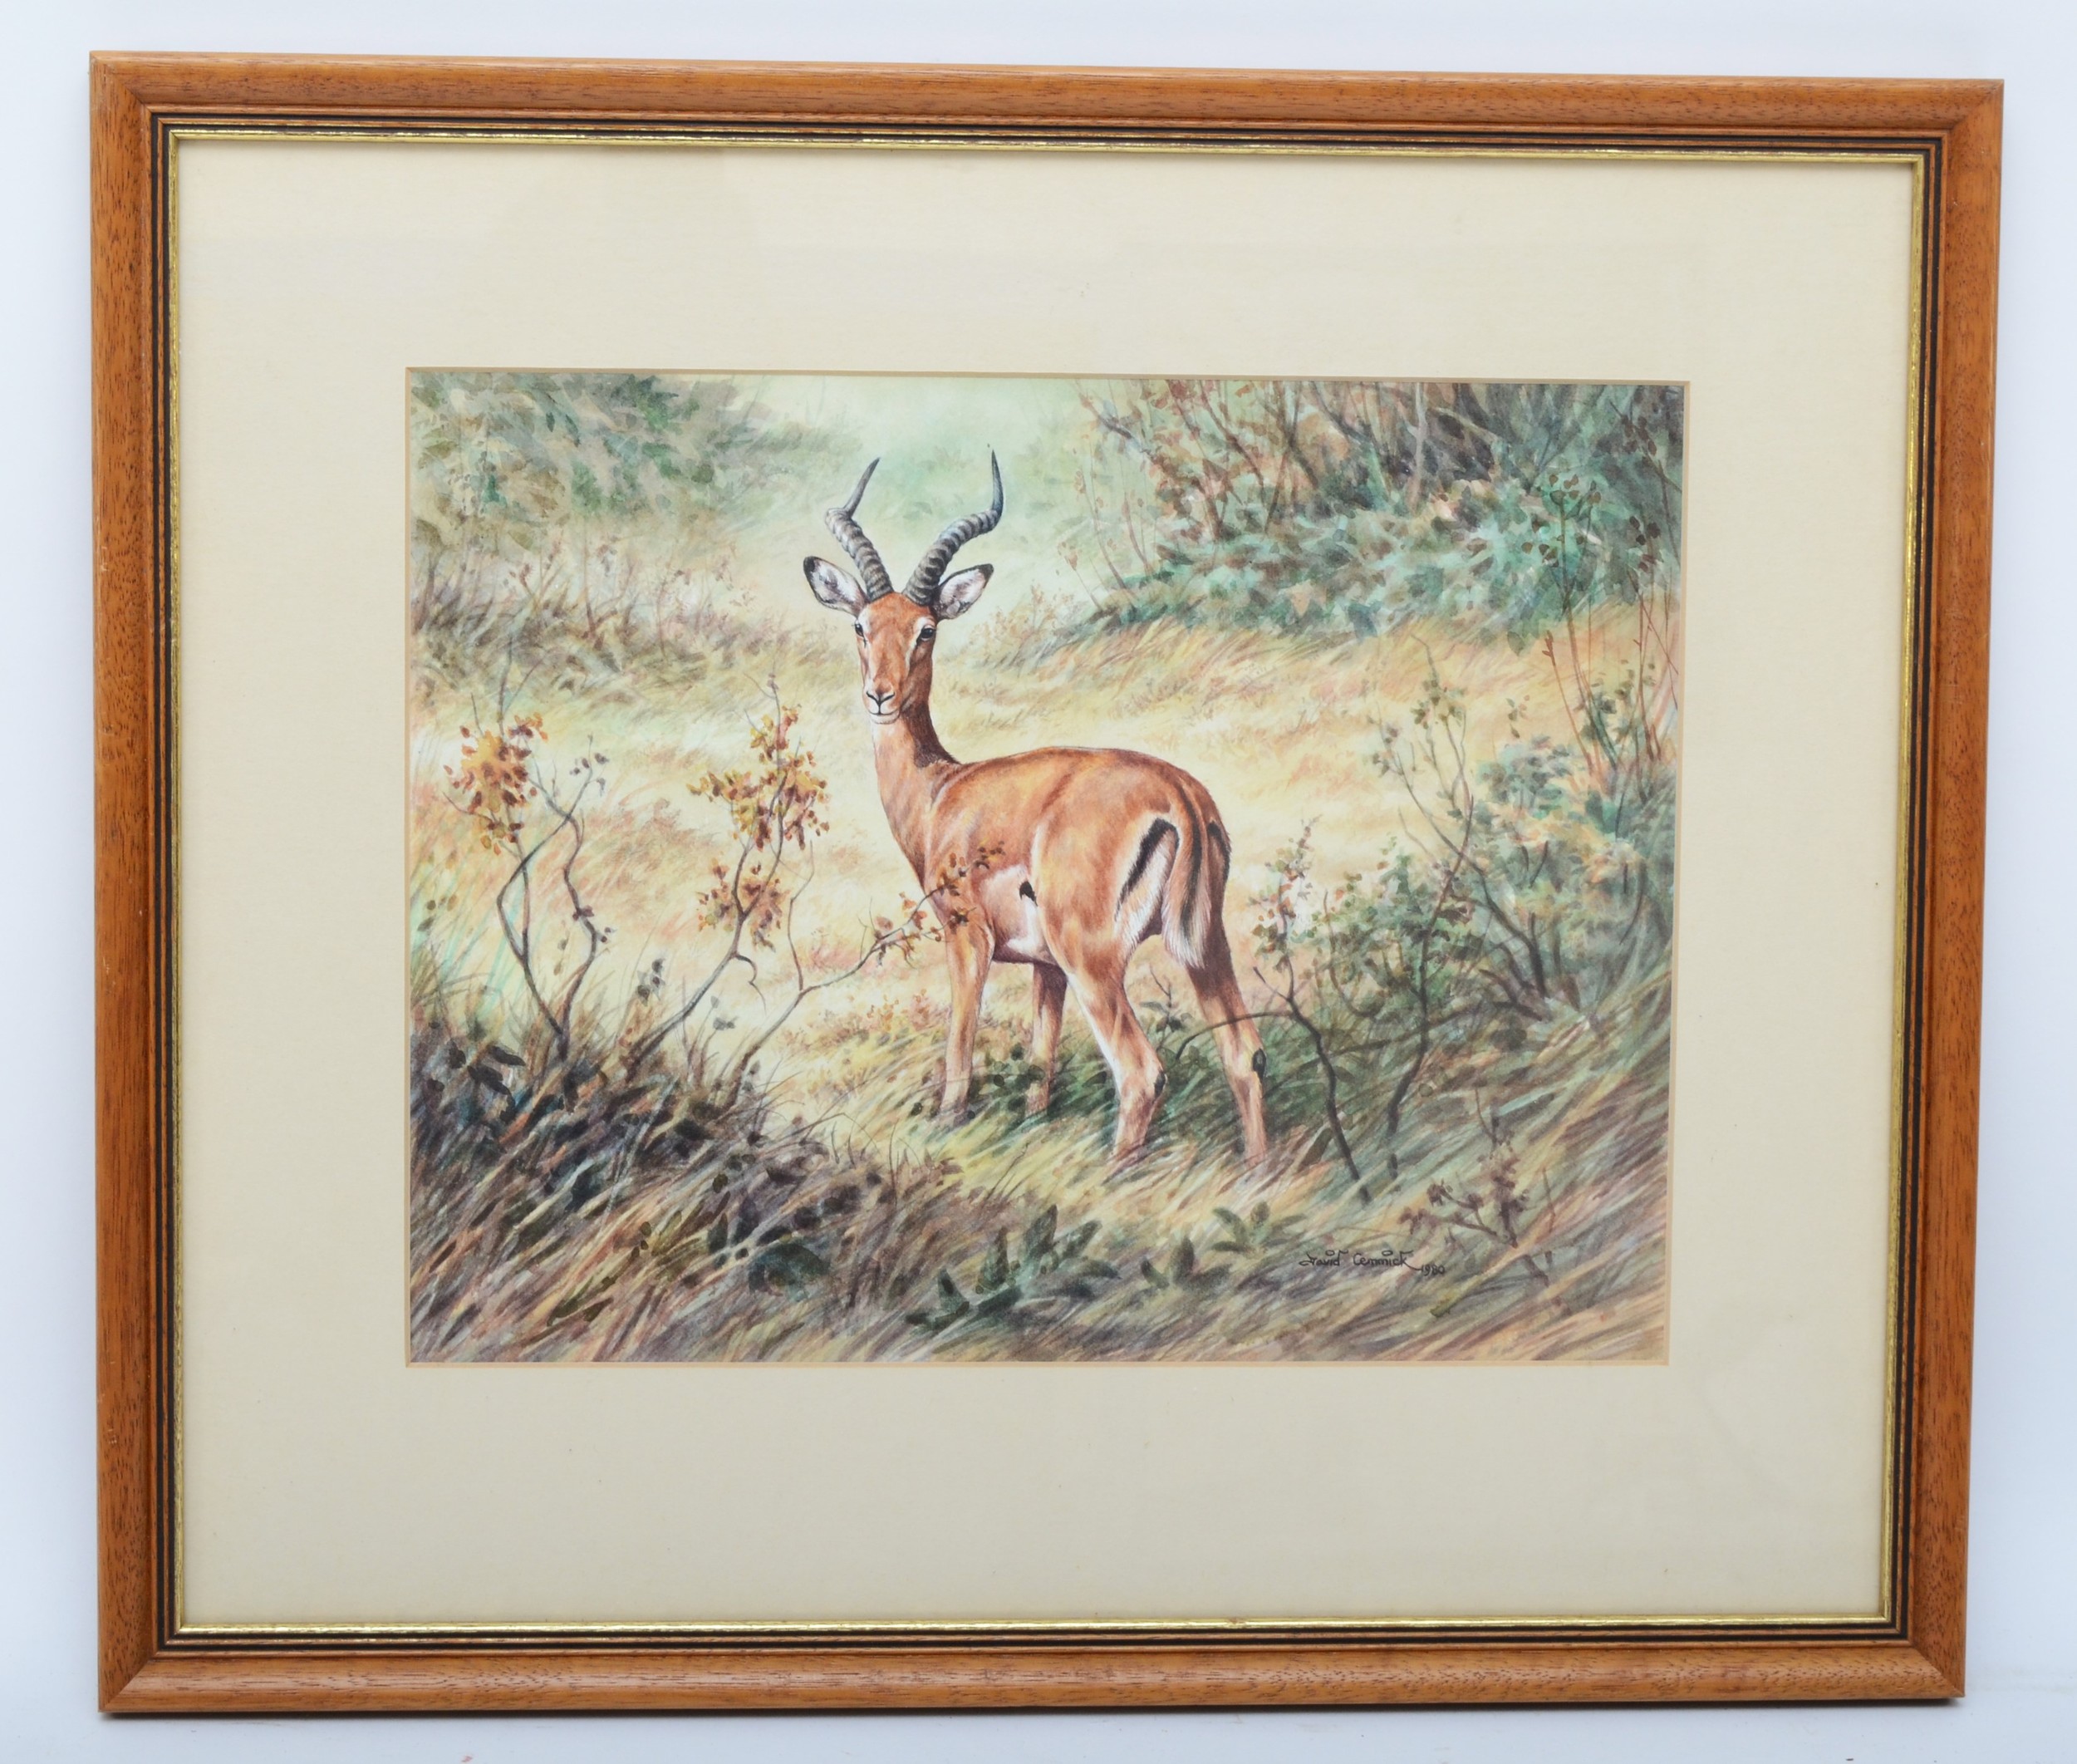 David Cemmick (20th century), Impala in Amboseli Reserve in Kenya, watercolour on paper, signed